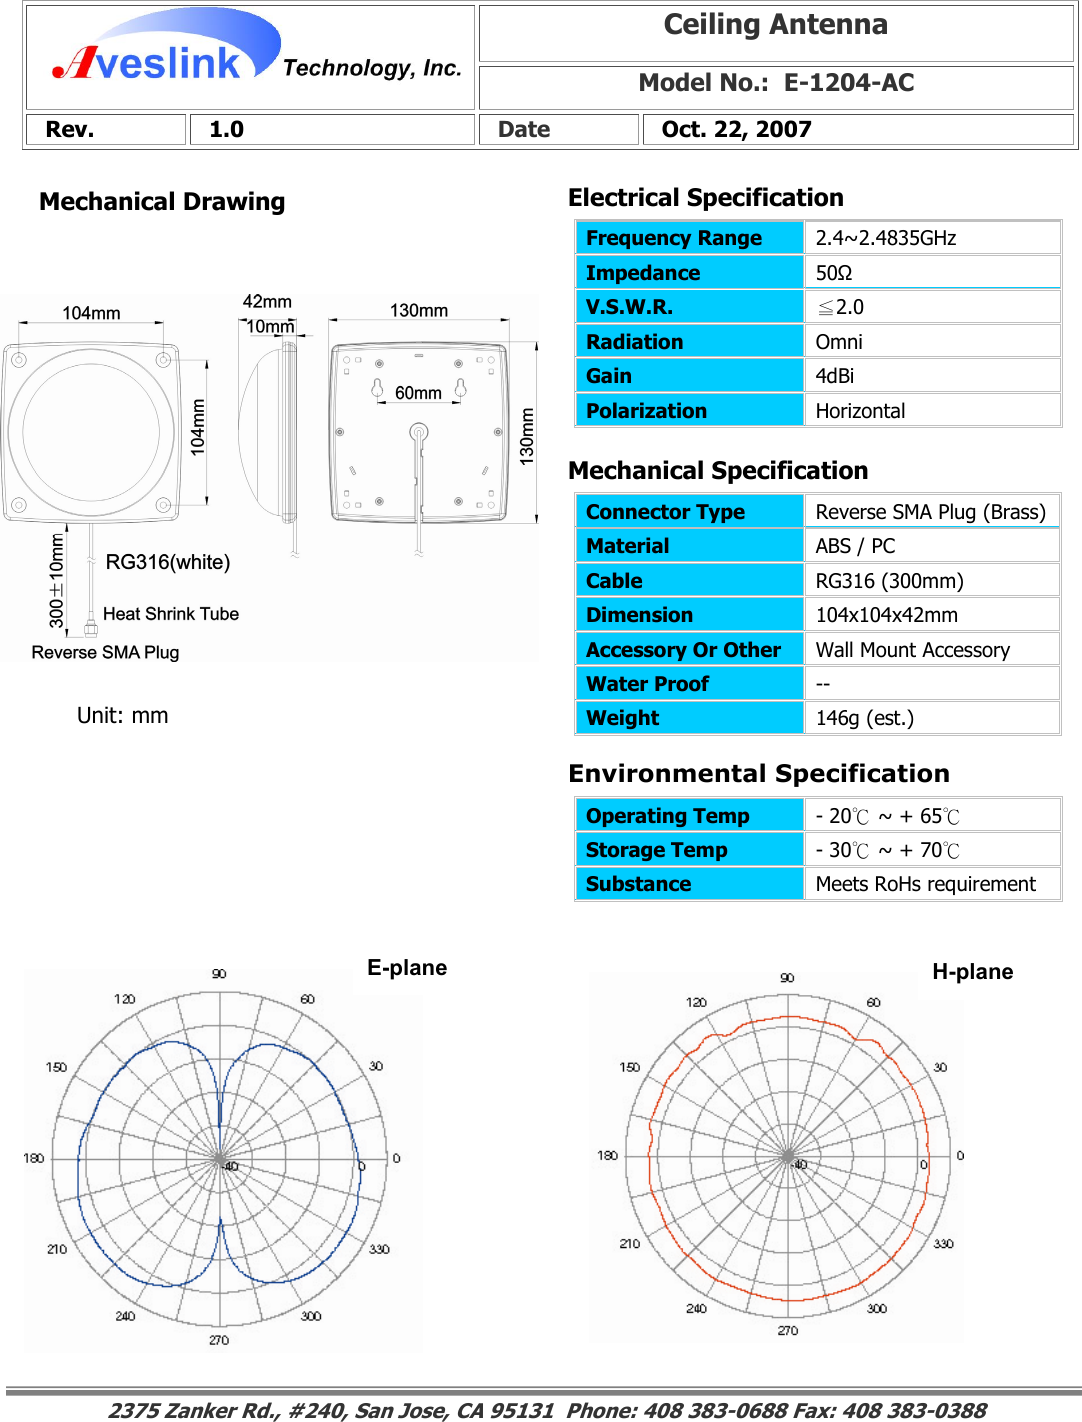 Mechanical DrawingMechanical Specification Environmental SpecificationCeiling Antenna Model No.:  E-1204-AC  Rev.   1.0   Date   Oct. 22, 2007 Connector Type   Reverse SMA Plug (Brass)Material  ABS / PC Cable  RG316 (300mm) Dimension  104x104x42mm Accessory Or Other  Wall Mount Accessory Water Proof  -- Weight  146g (est.)                                                                                                                                                                                                                        2375 Zanker Rd., #240, San Jose, CA 95131  Phone: 408 383-0688 Fax: 408 383-0388 Operating Temp  - 20  ~ + 65℃℃ Storage Temp  - 30  ~ + 70℃℃ Substance  Meets RoHs requirement Electrical SpecificationFrequency Range   2.4~2.4835GHz Impedance  50Ω V.S.W.R.  ≦2.0 Radiation  Omni Gain  4dBi Polarization  Horizontal E-plane  H-plane Unit: mm 